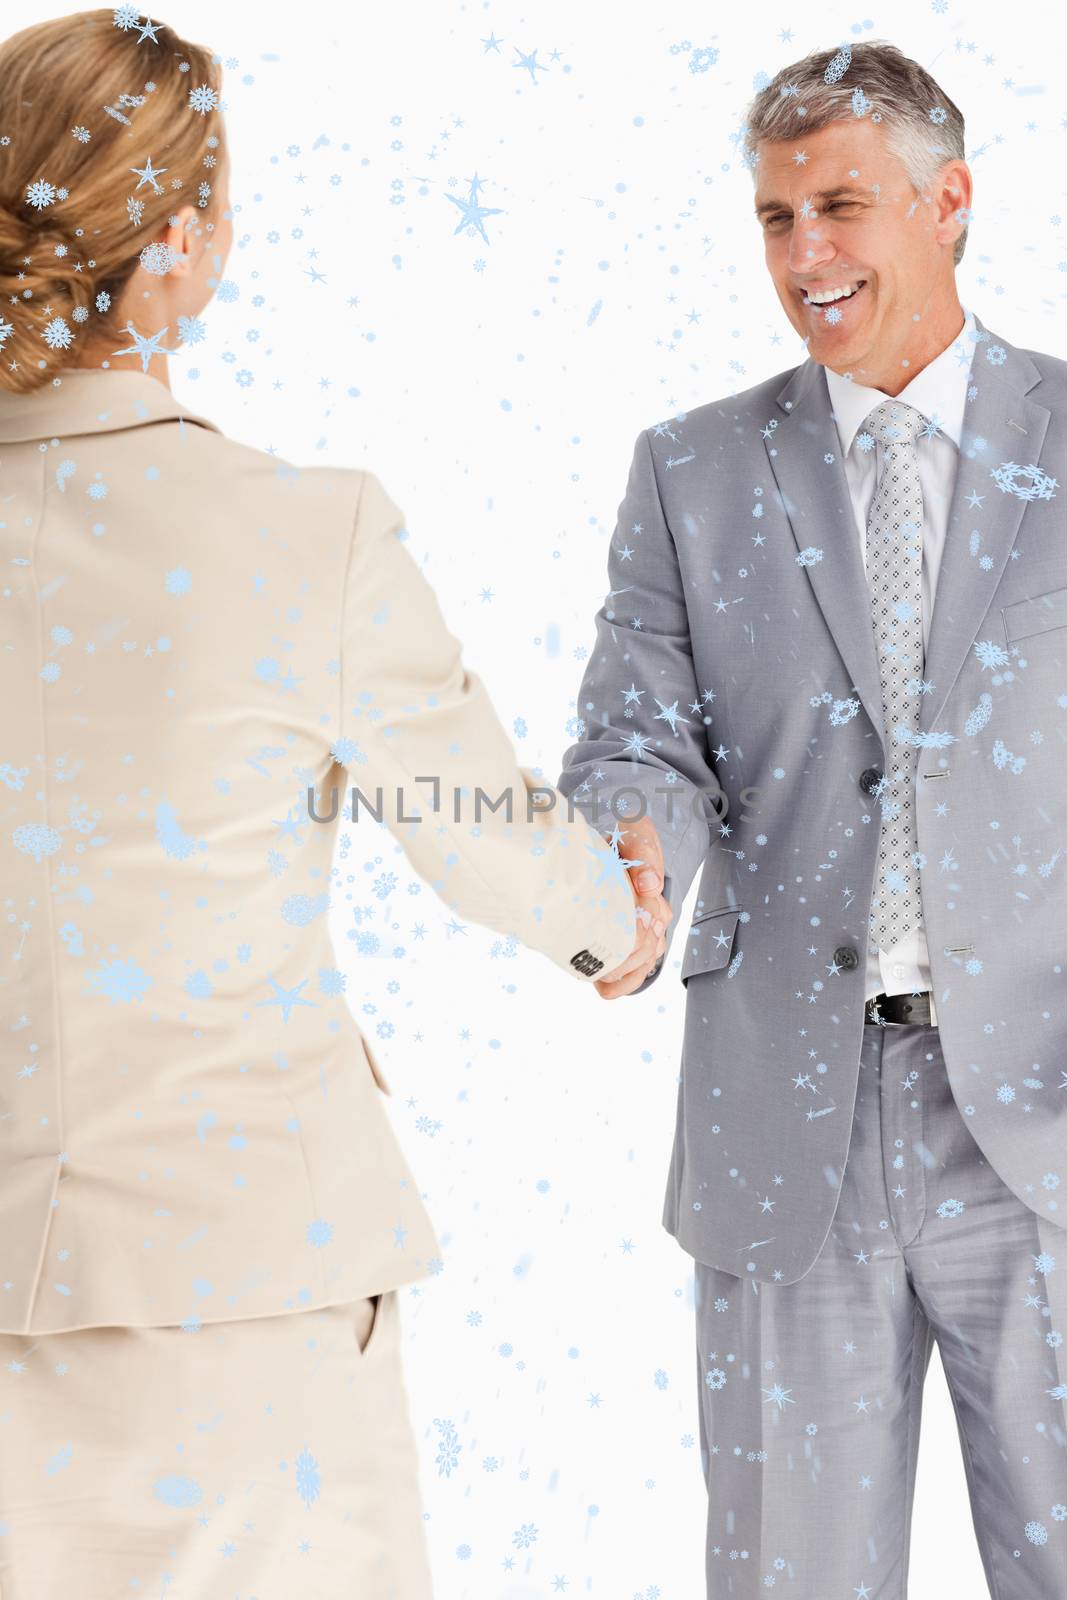 Composite image of Happy business people shaking hands with snow falling